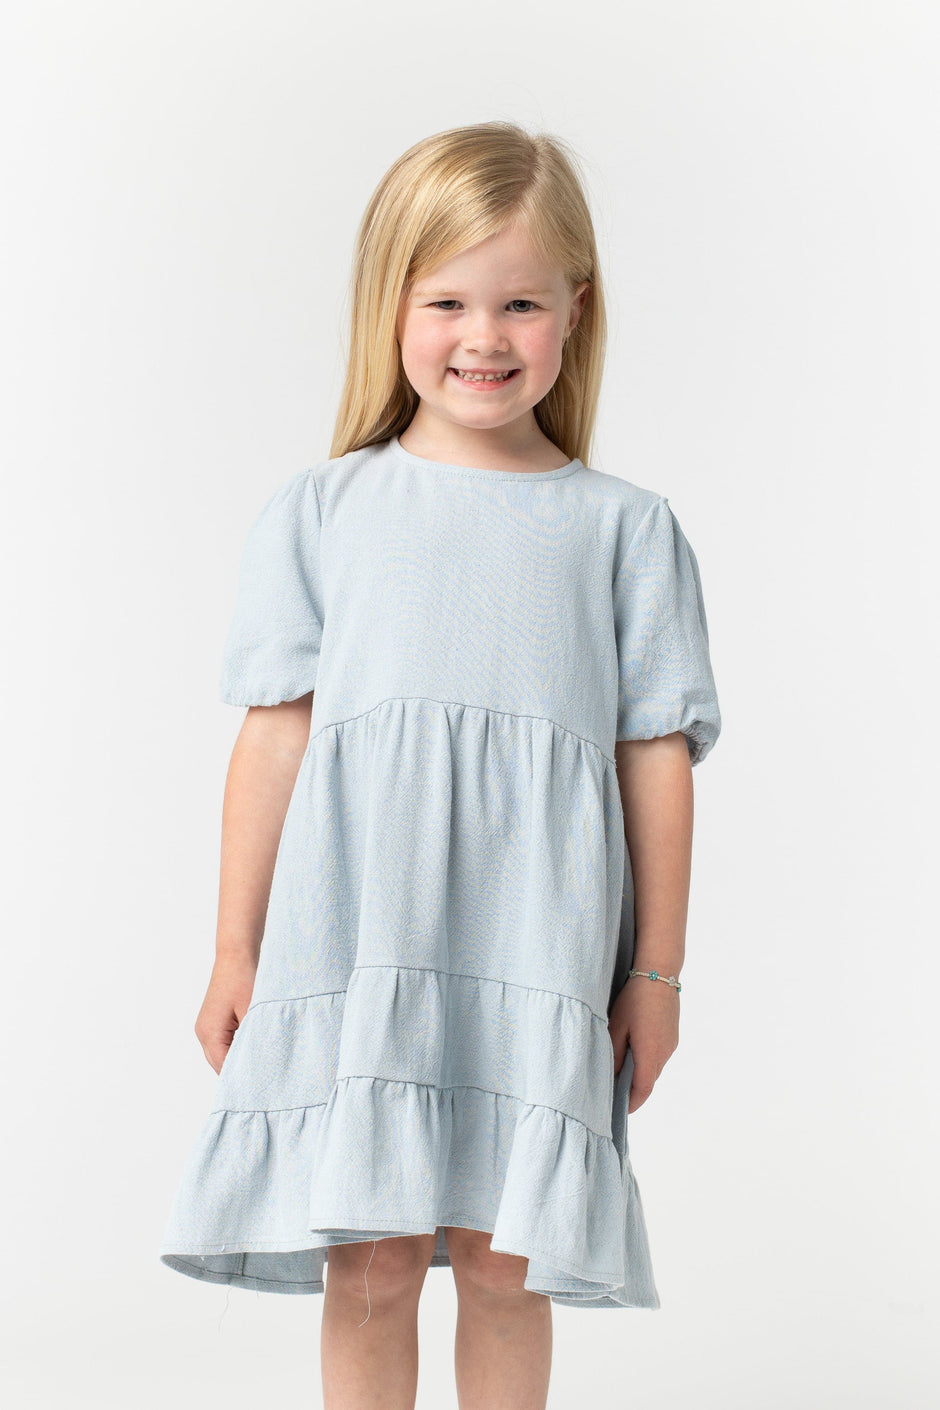 Cute Boutique Kids Clothing at Called to Surf